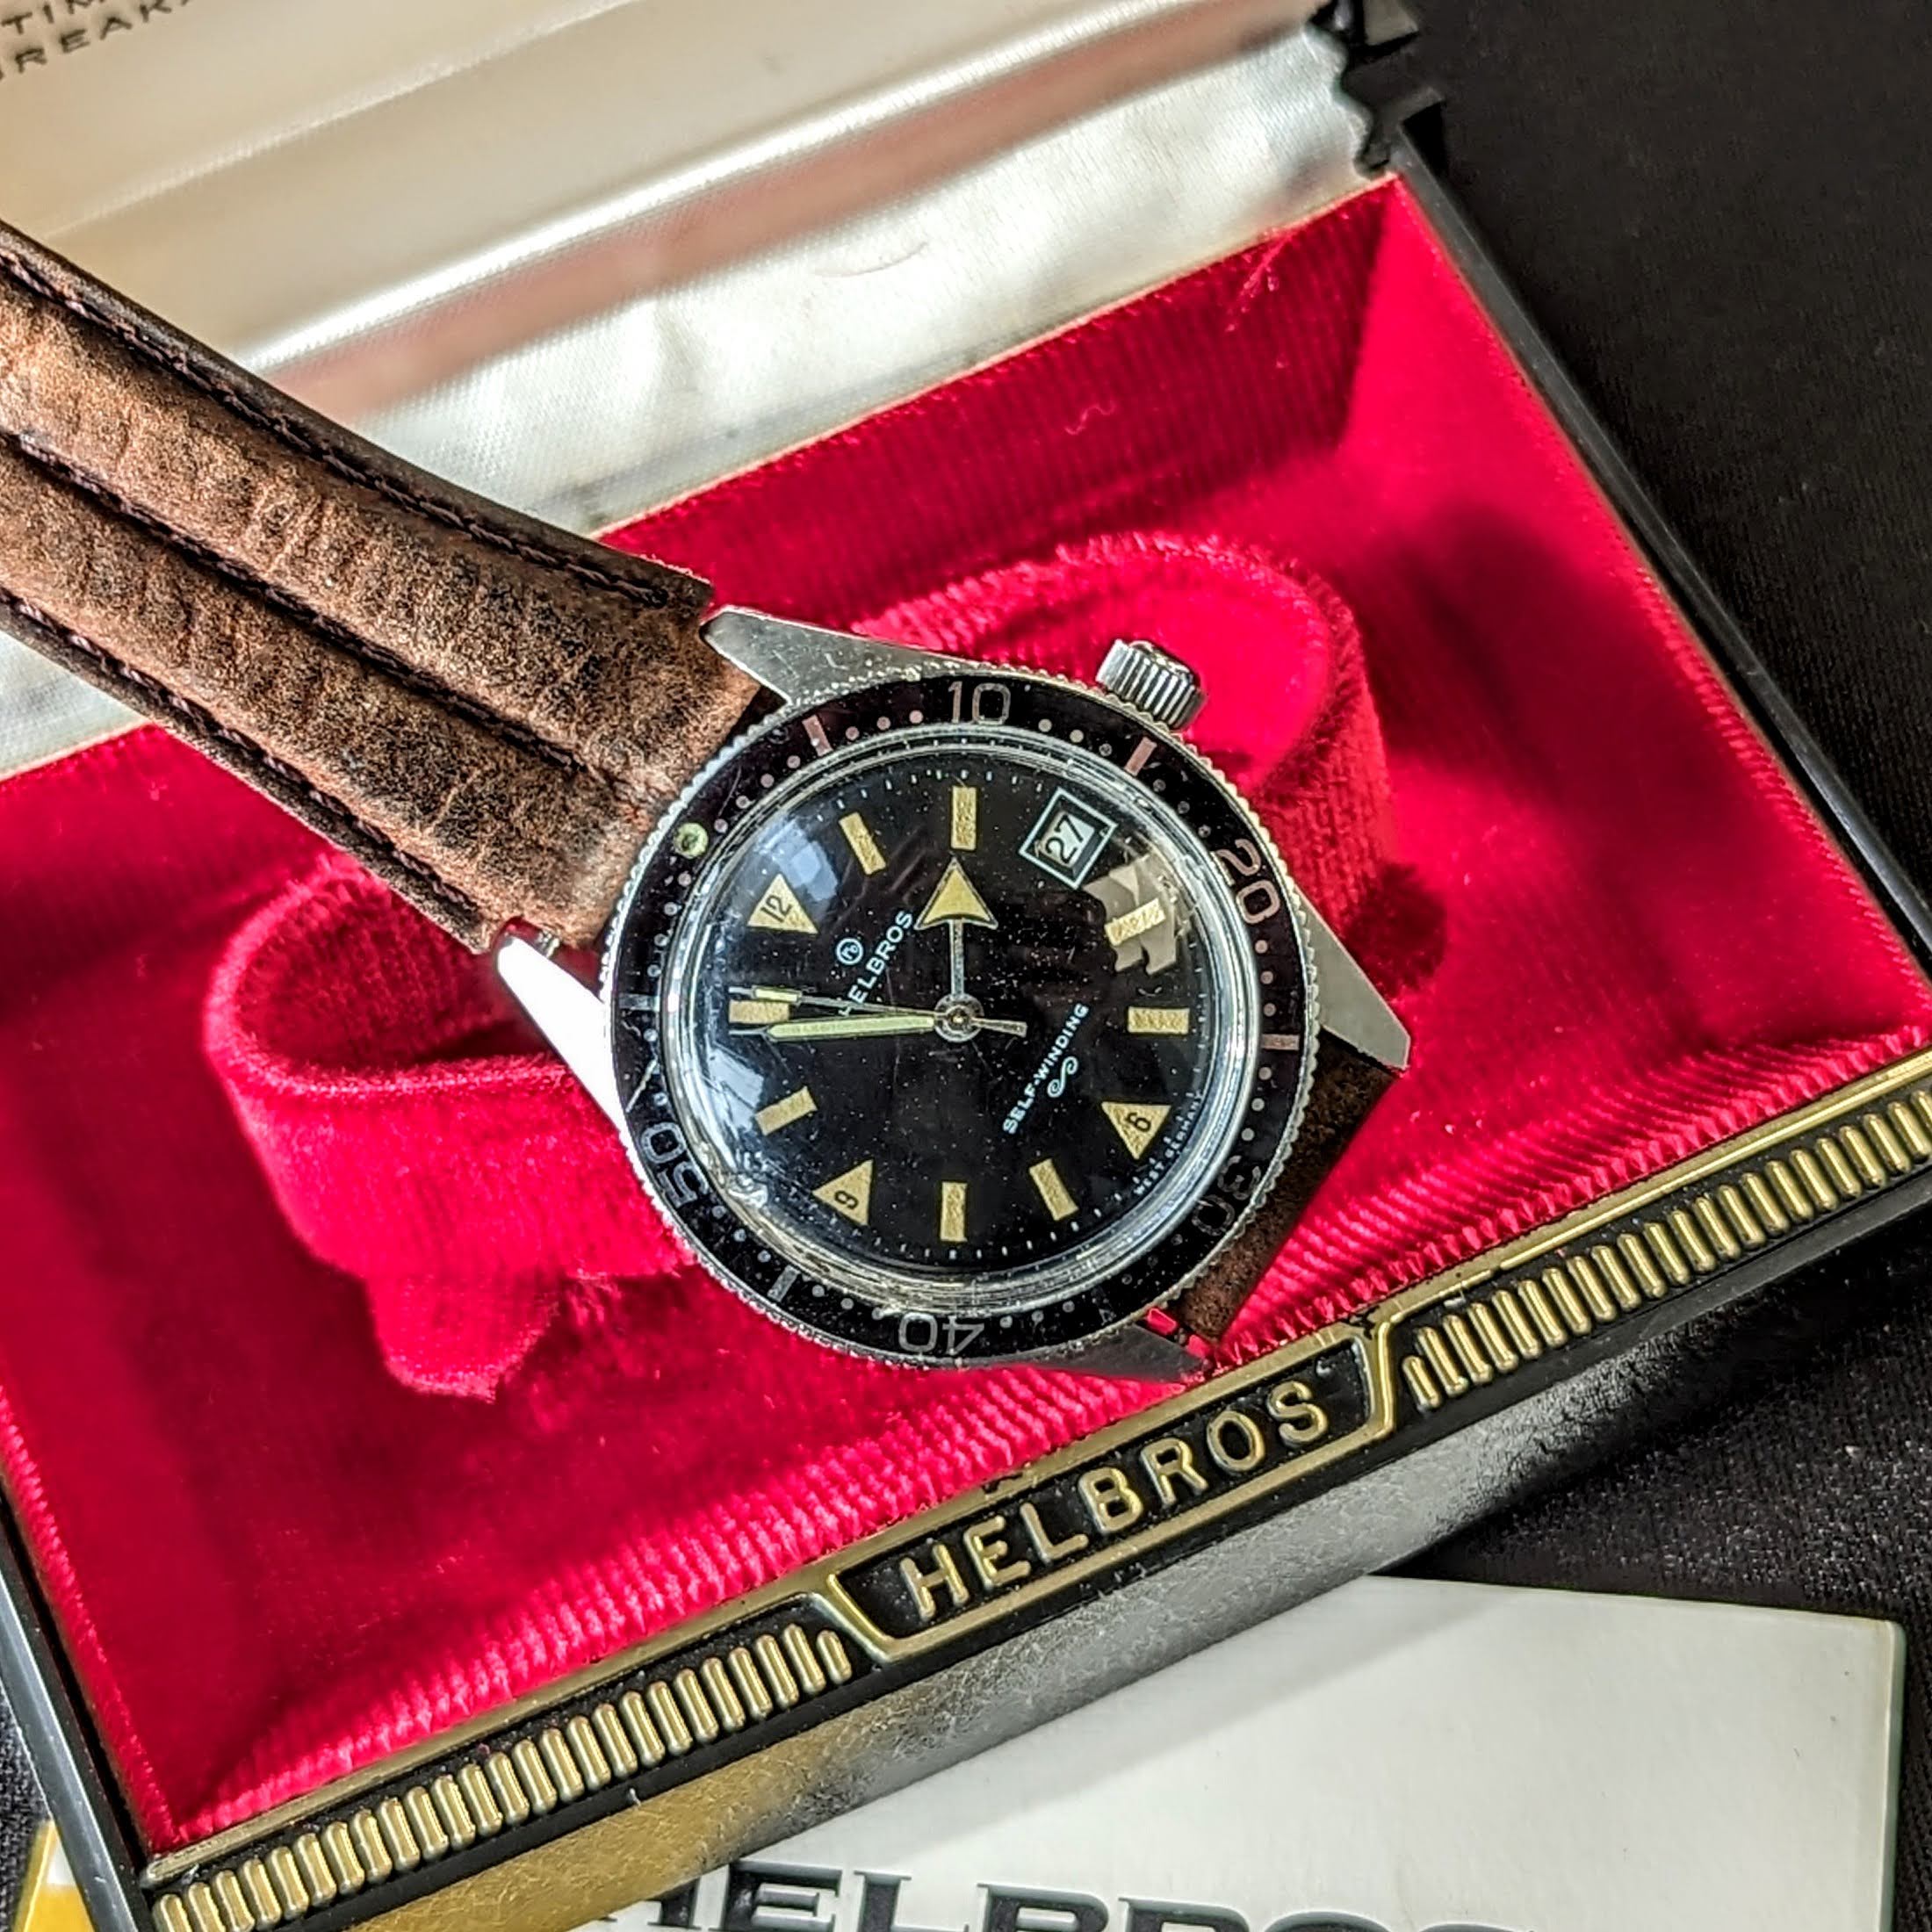 1960s HELBROS Invincible Skin Diver Automatic Wristwatch 17 Jewels Cal. PUW 1461 Germany Made